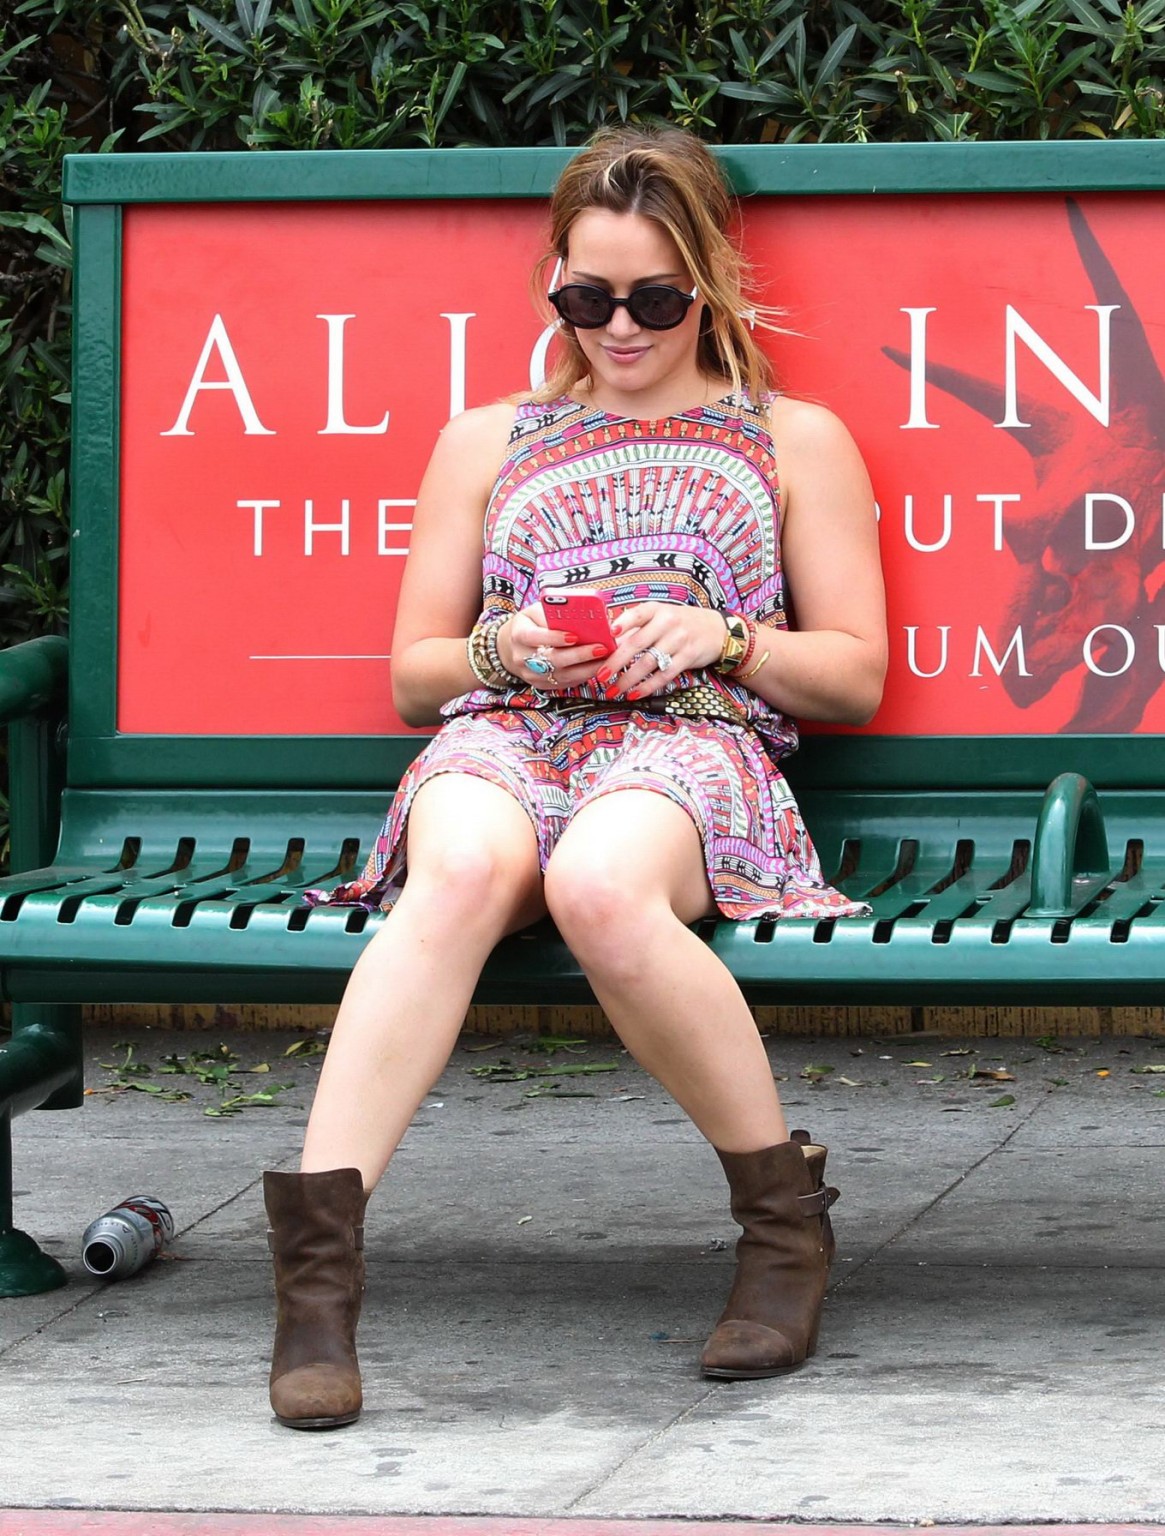 Hilary Duff Upskirt Wearing Colorful Mini Dress While Pretending To Wait For A B